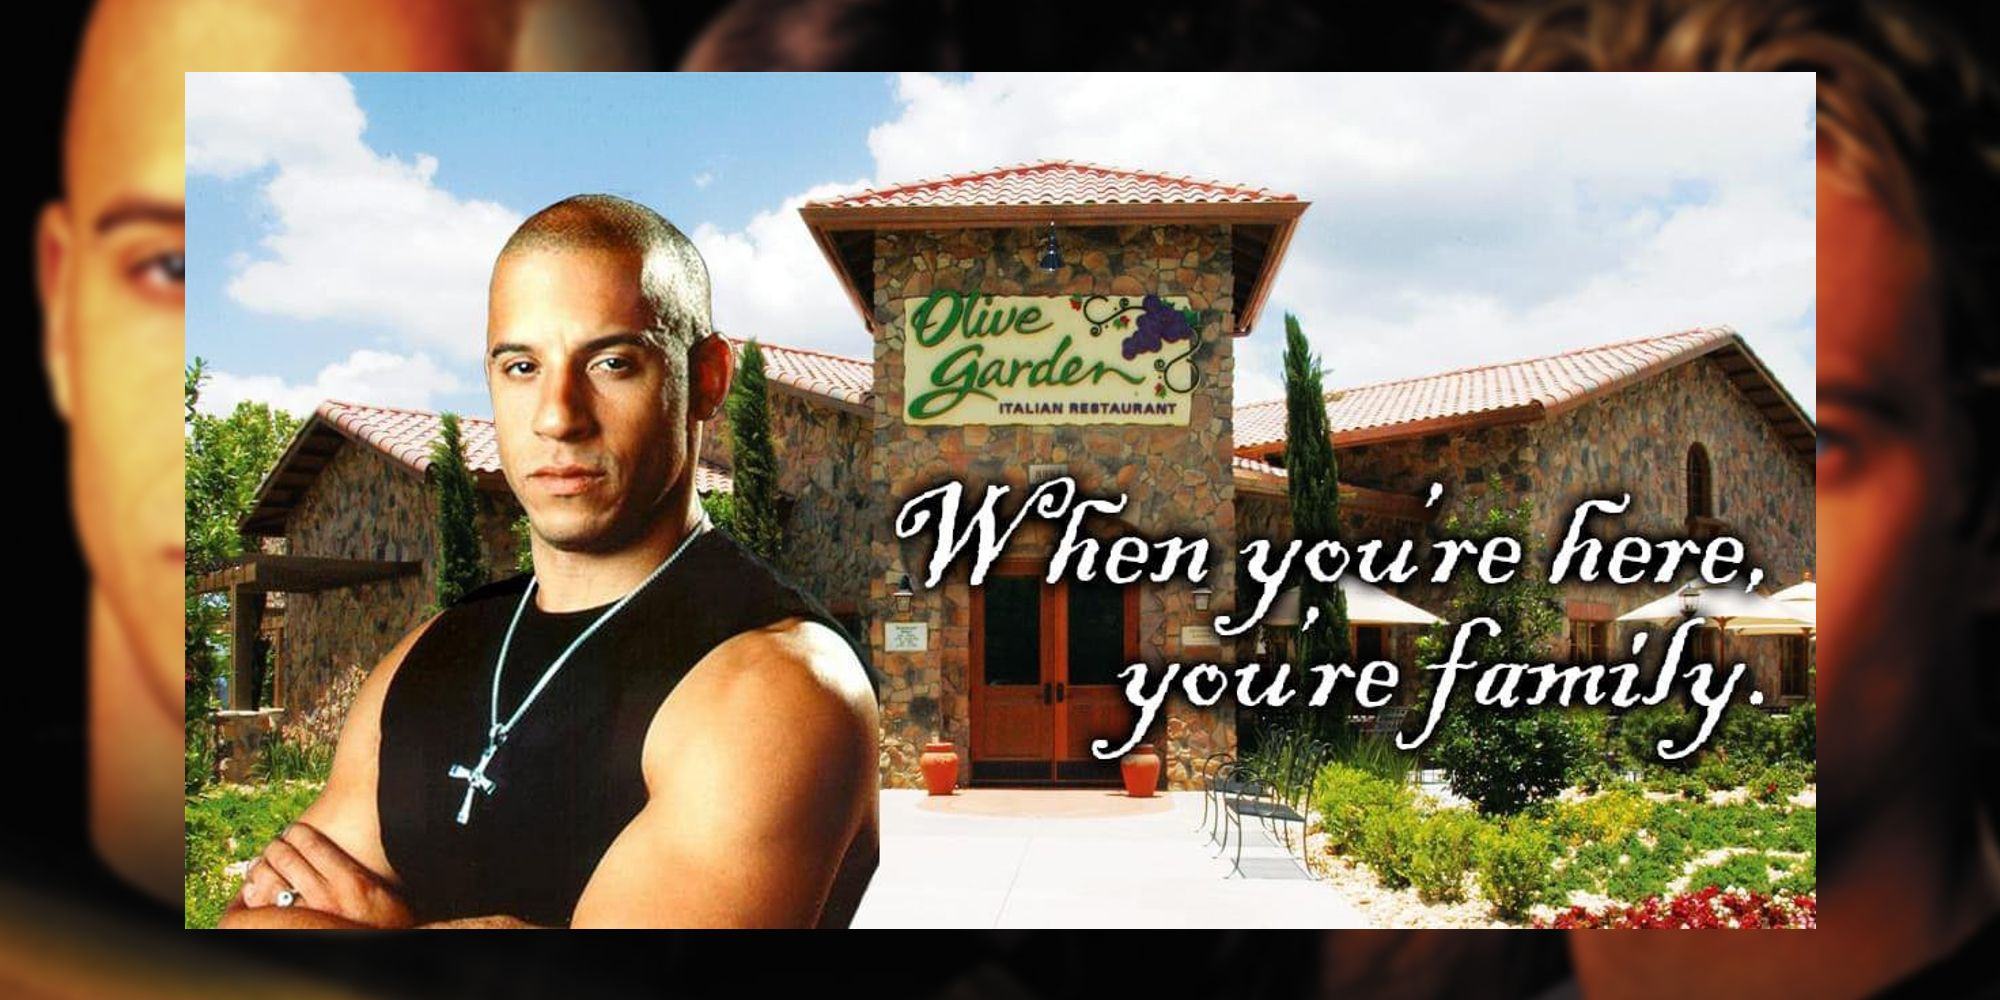 Fast and furious Olive Garden meme.